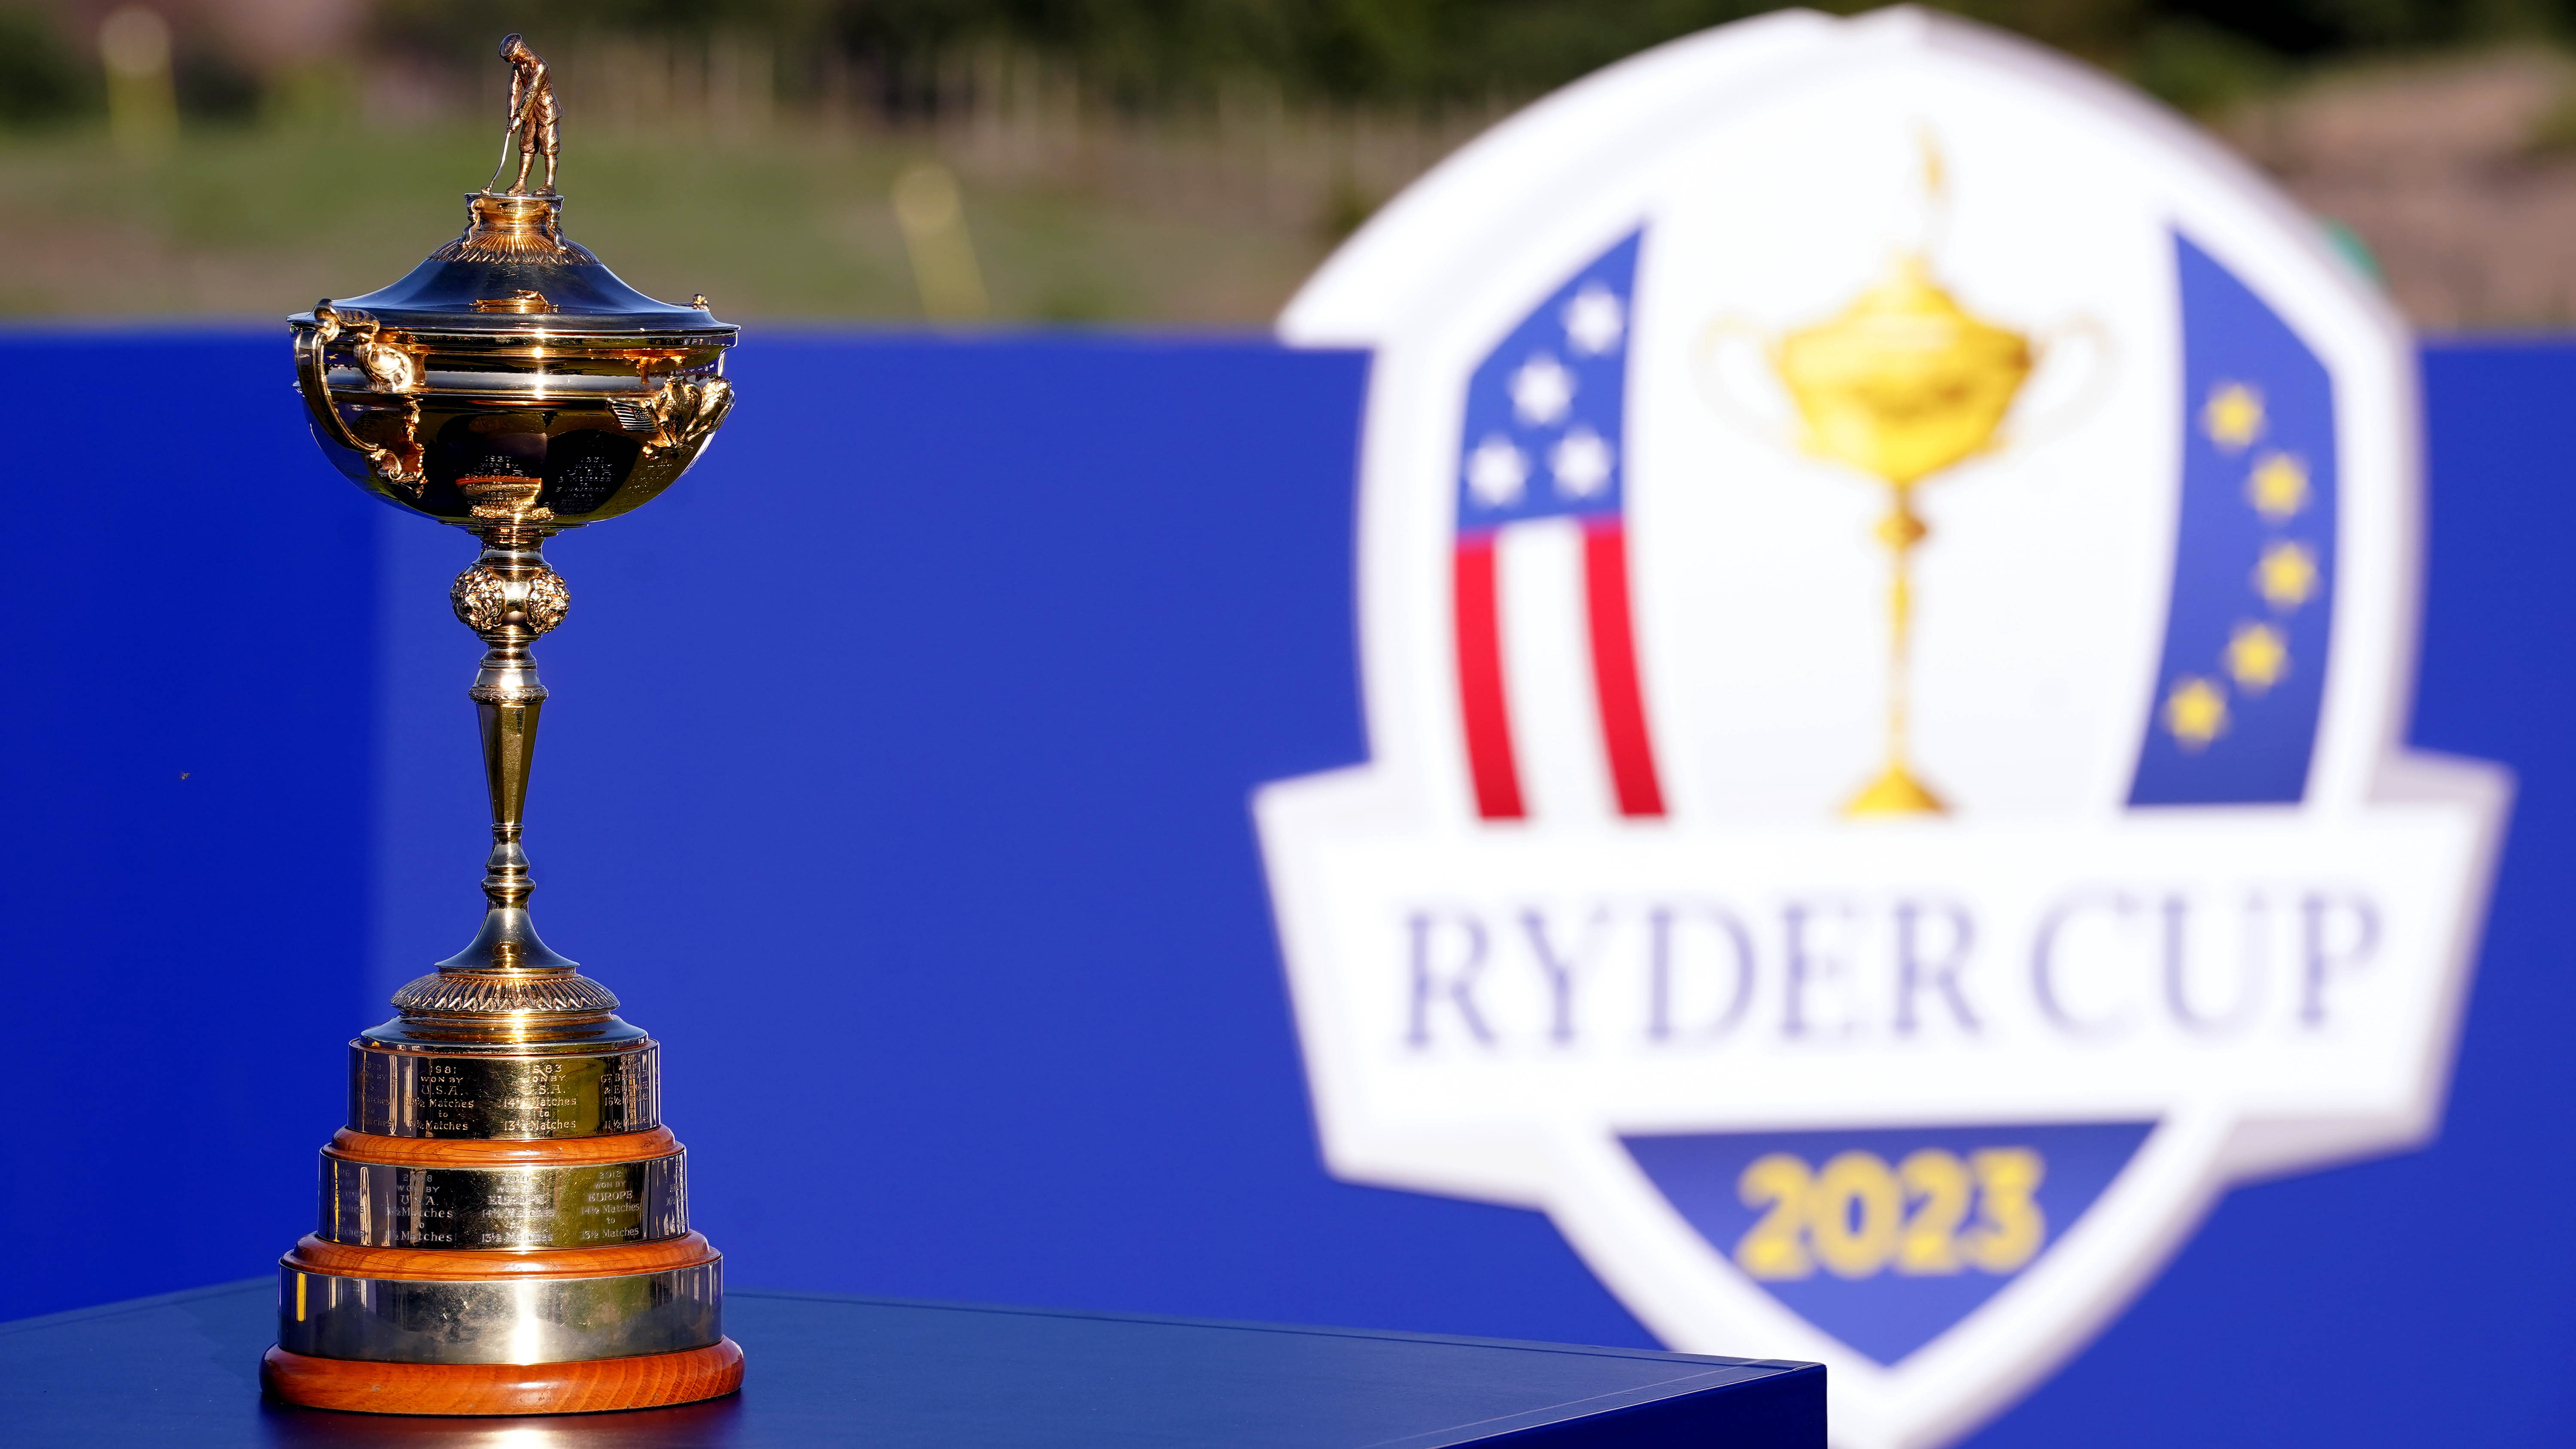 2023 Ryder Cup dates, location, teams, format, watch info